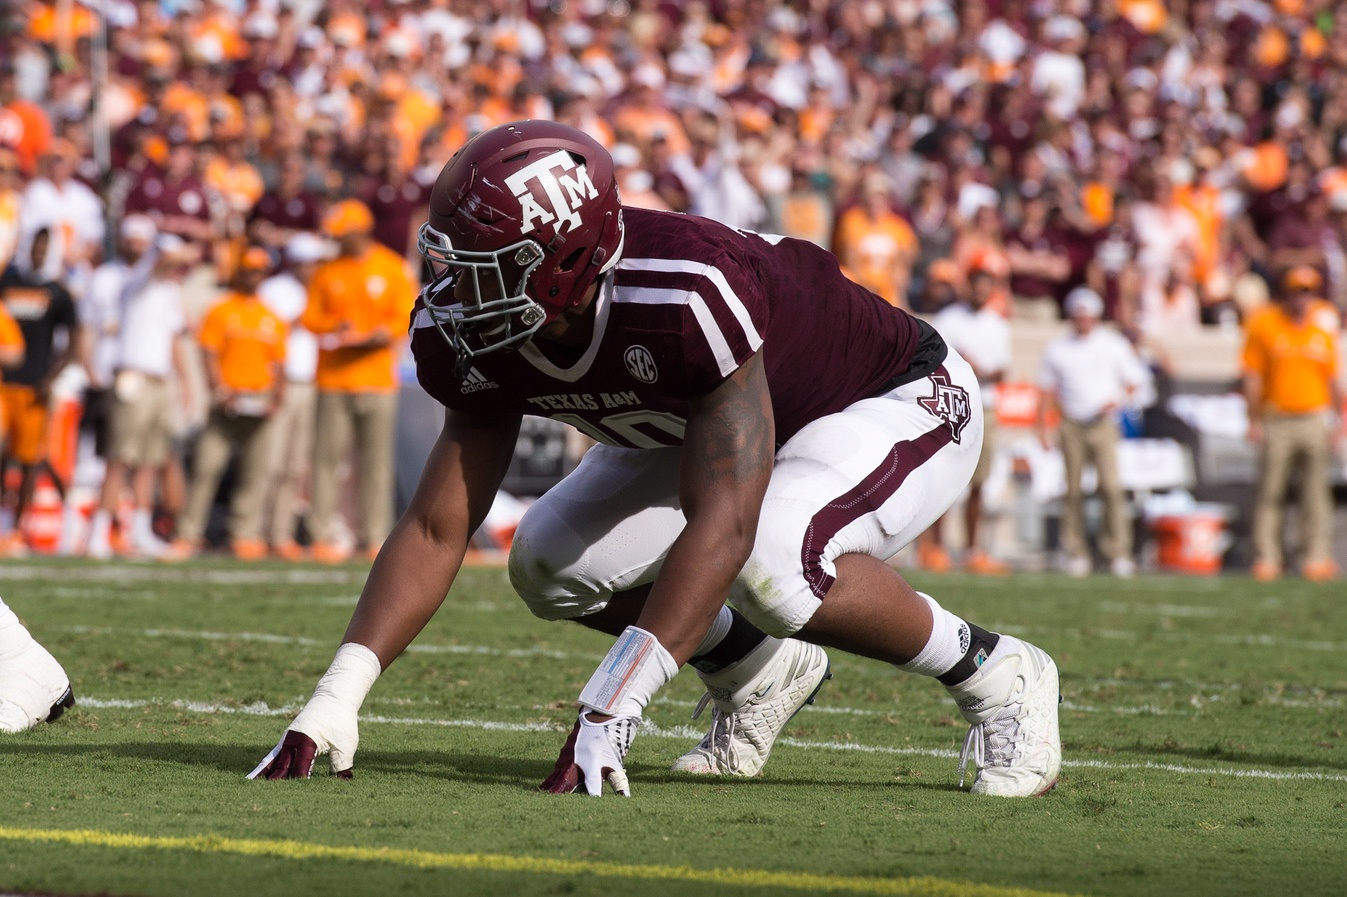 Oct 8, 2016; College Station, TX, USA; Texas A&M Aggies defensive lineman Daeshon Hall (10) in action during the game against the Tennessee Volunteers at Kyle Field. The Aggies defeat the Volunteers 45-38 in overtime. Mandatory Credit: Jerome Miron-USA TODAY Sports